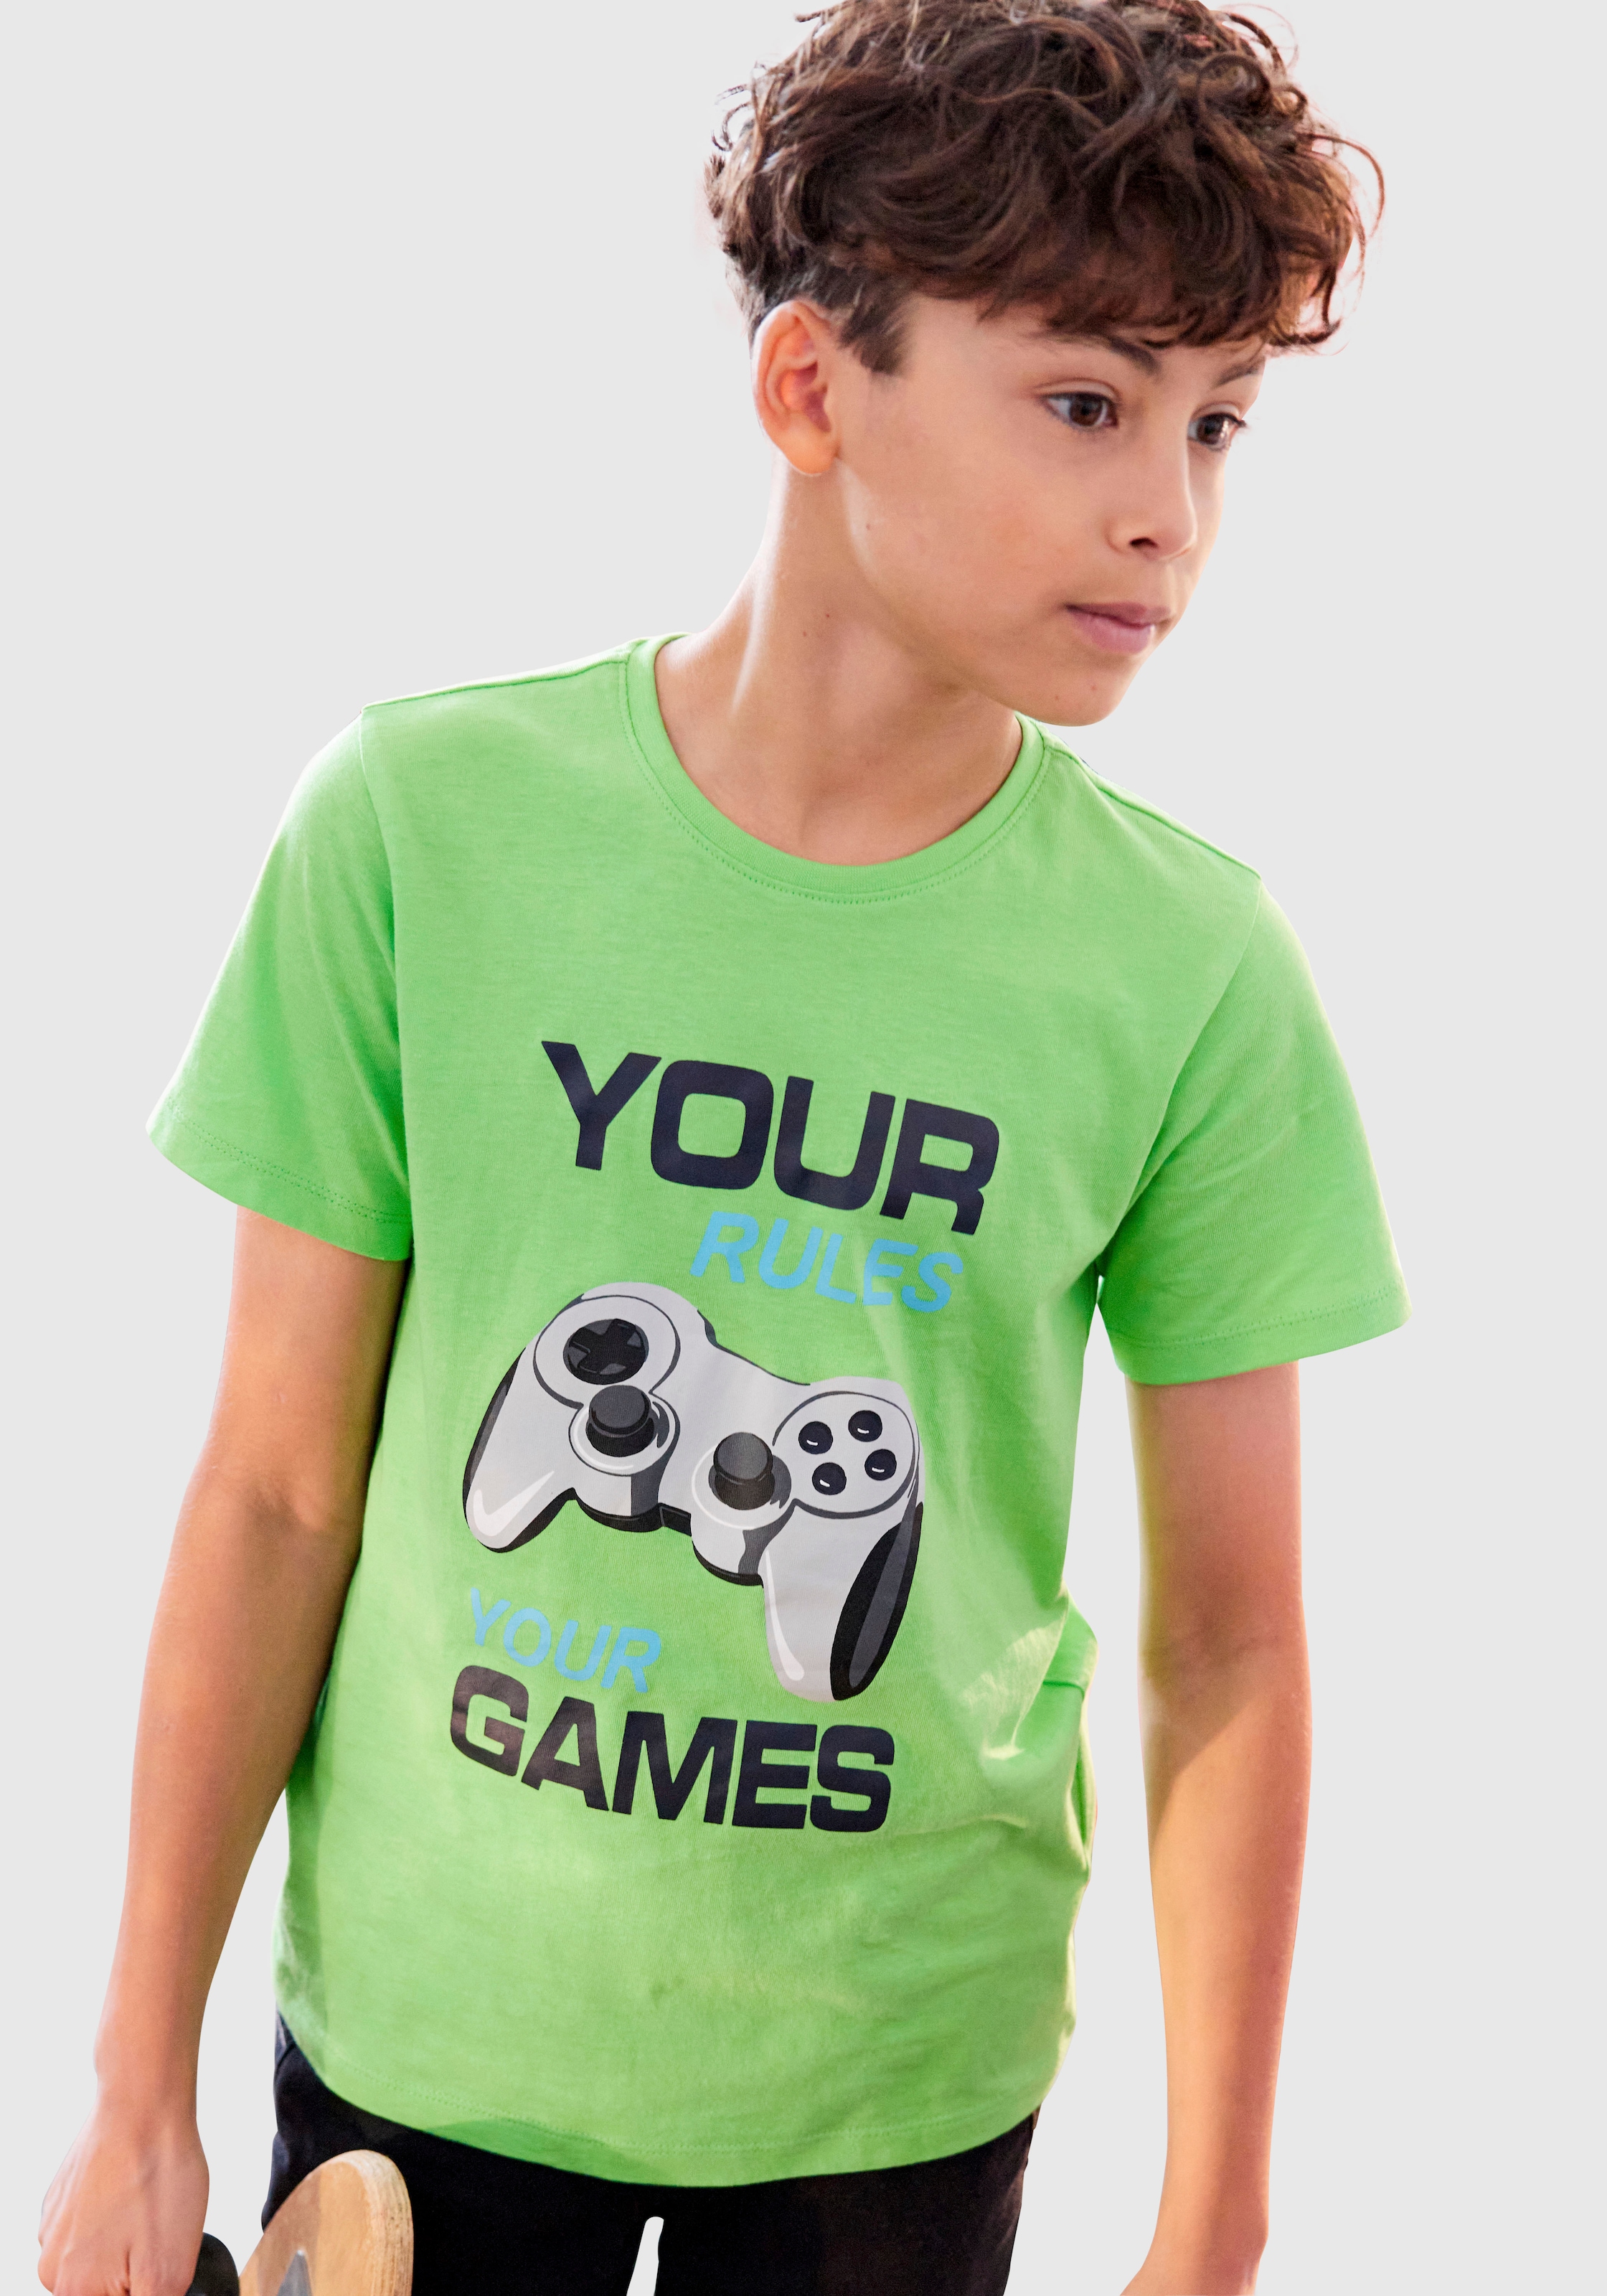 T-Shirt RULES YOUR »YOUR bei GAMES« KIDSWORLD